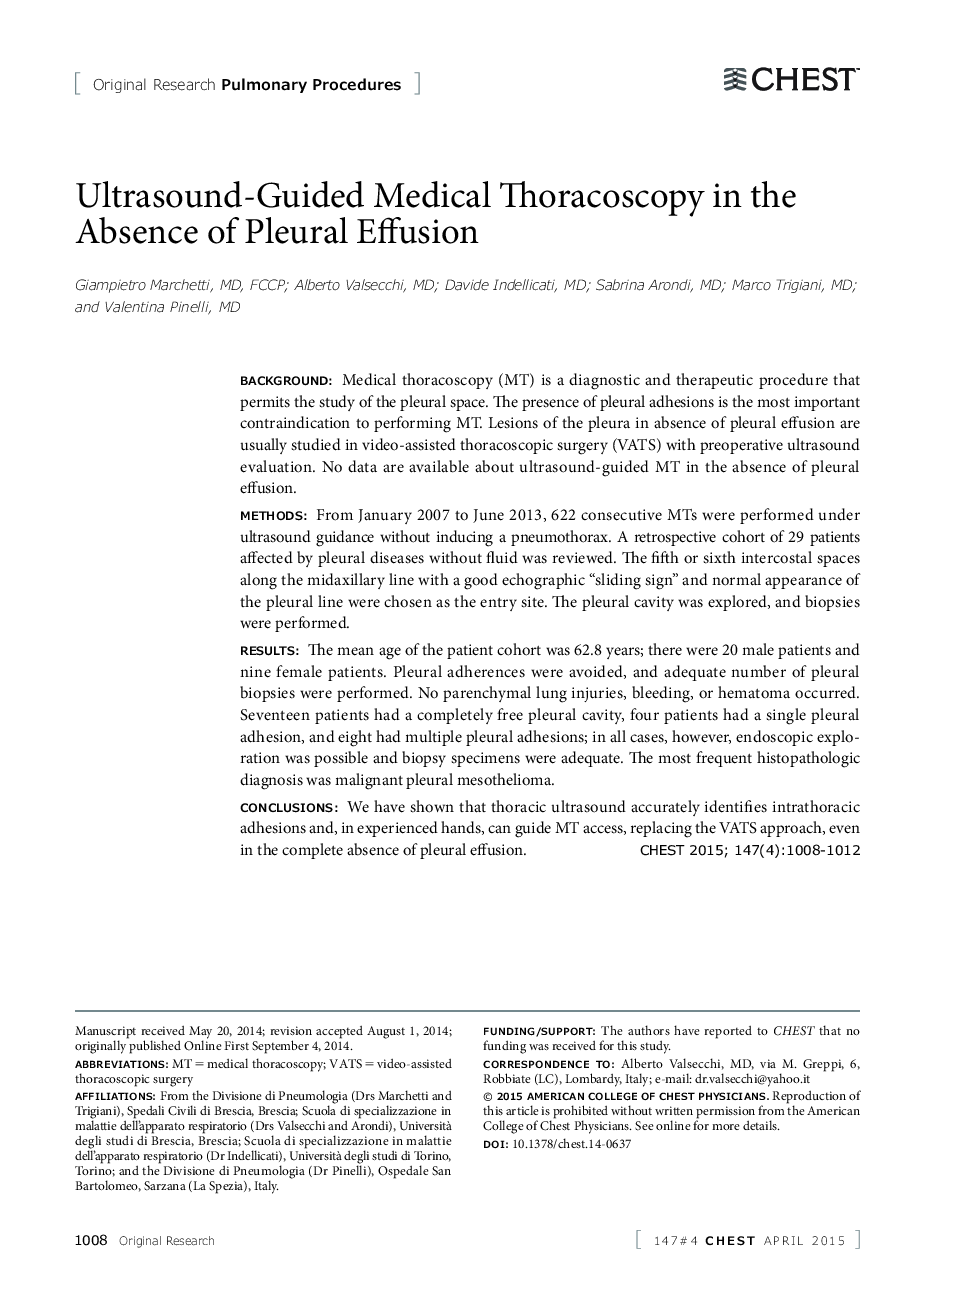 Ultrasound-Guided Medical Thoracoscopy in the Absence of Pleural Effusion 